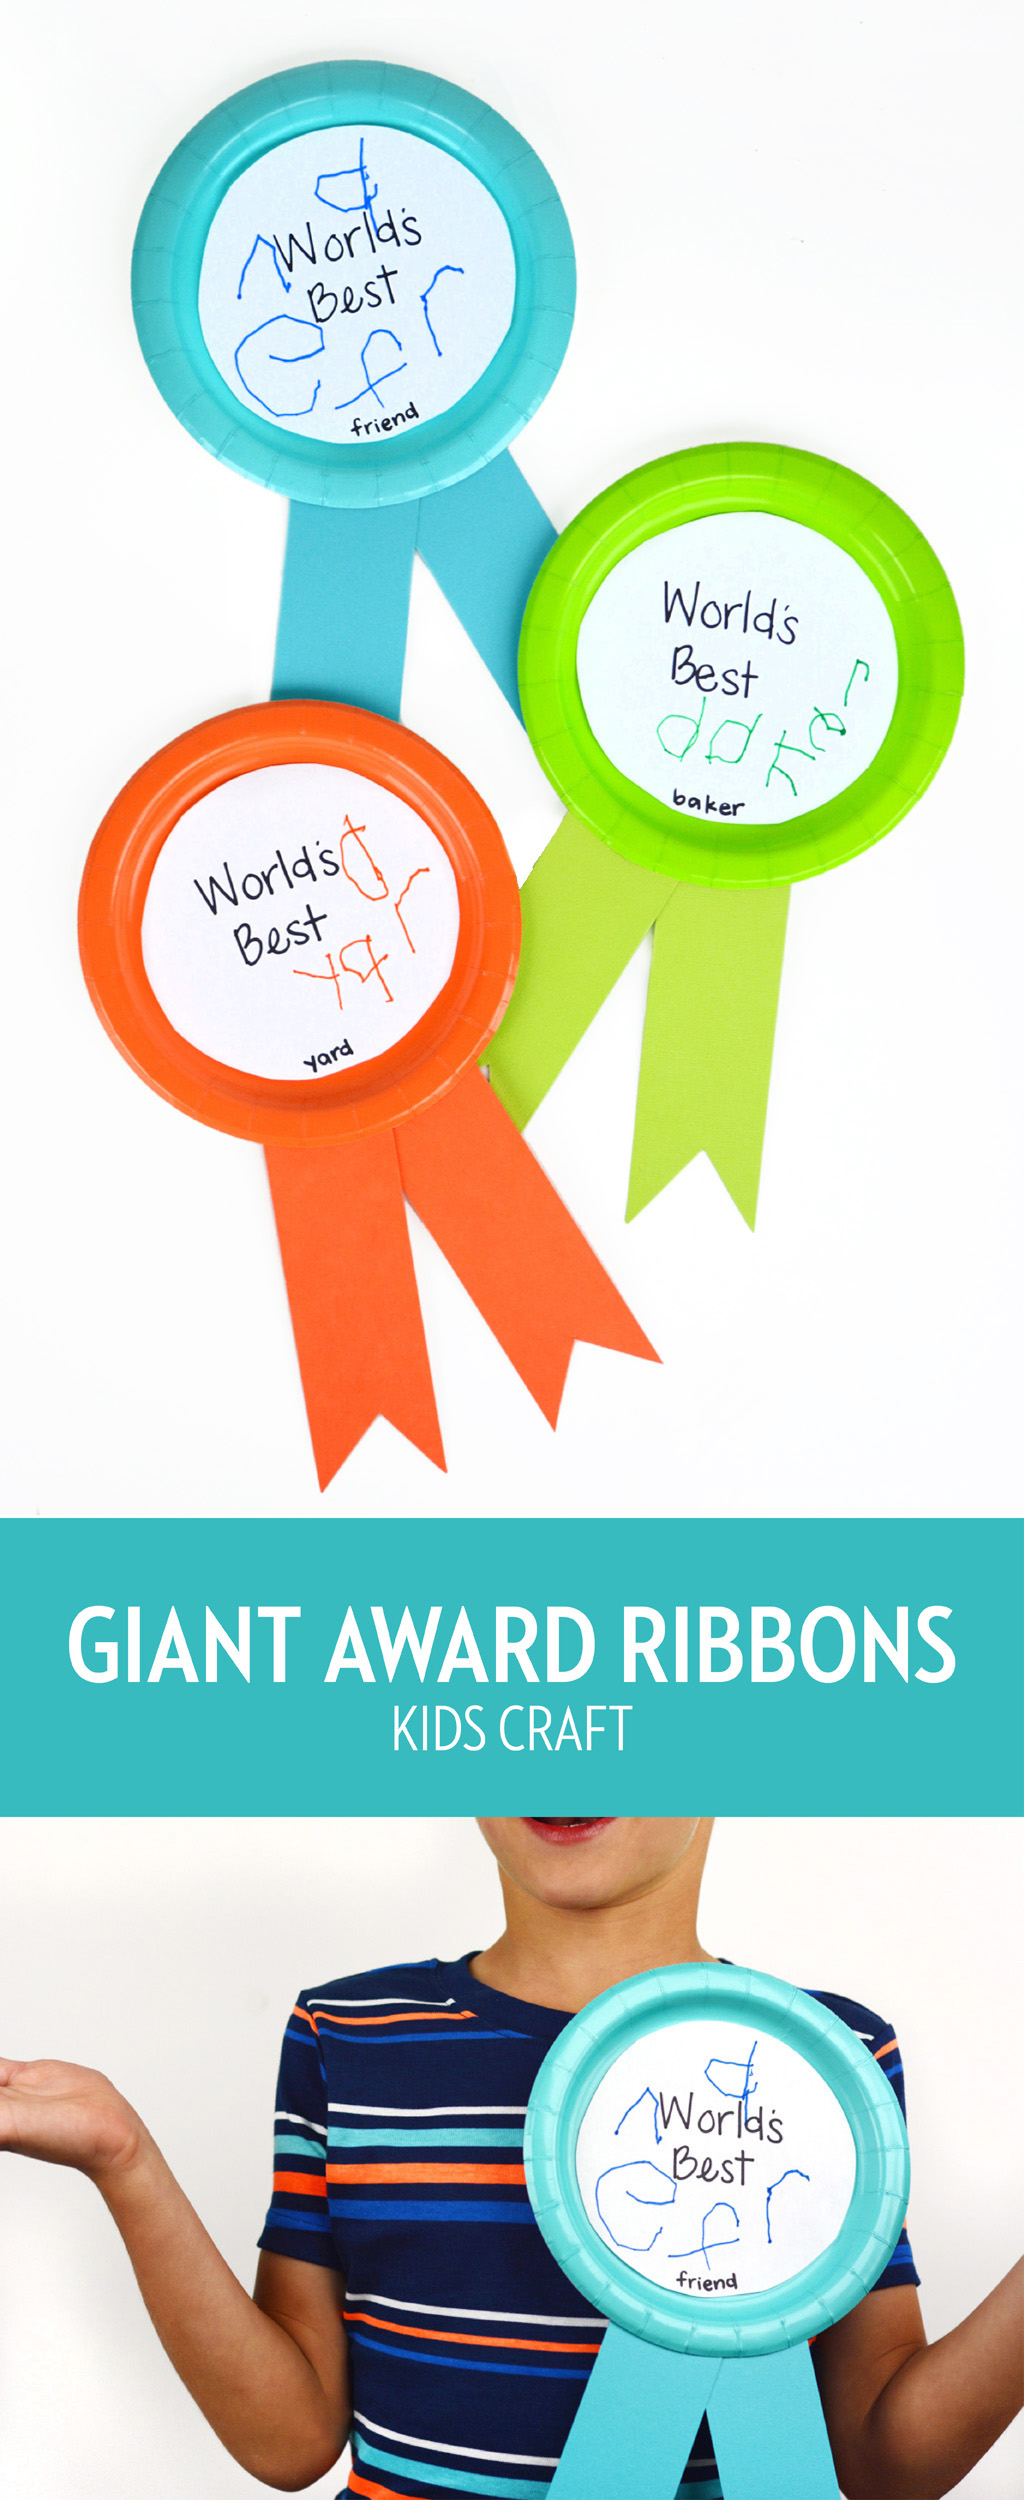 Giant Award Ribbons Kids Craft - The Crafting Chicks